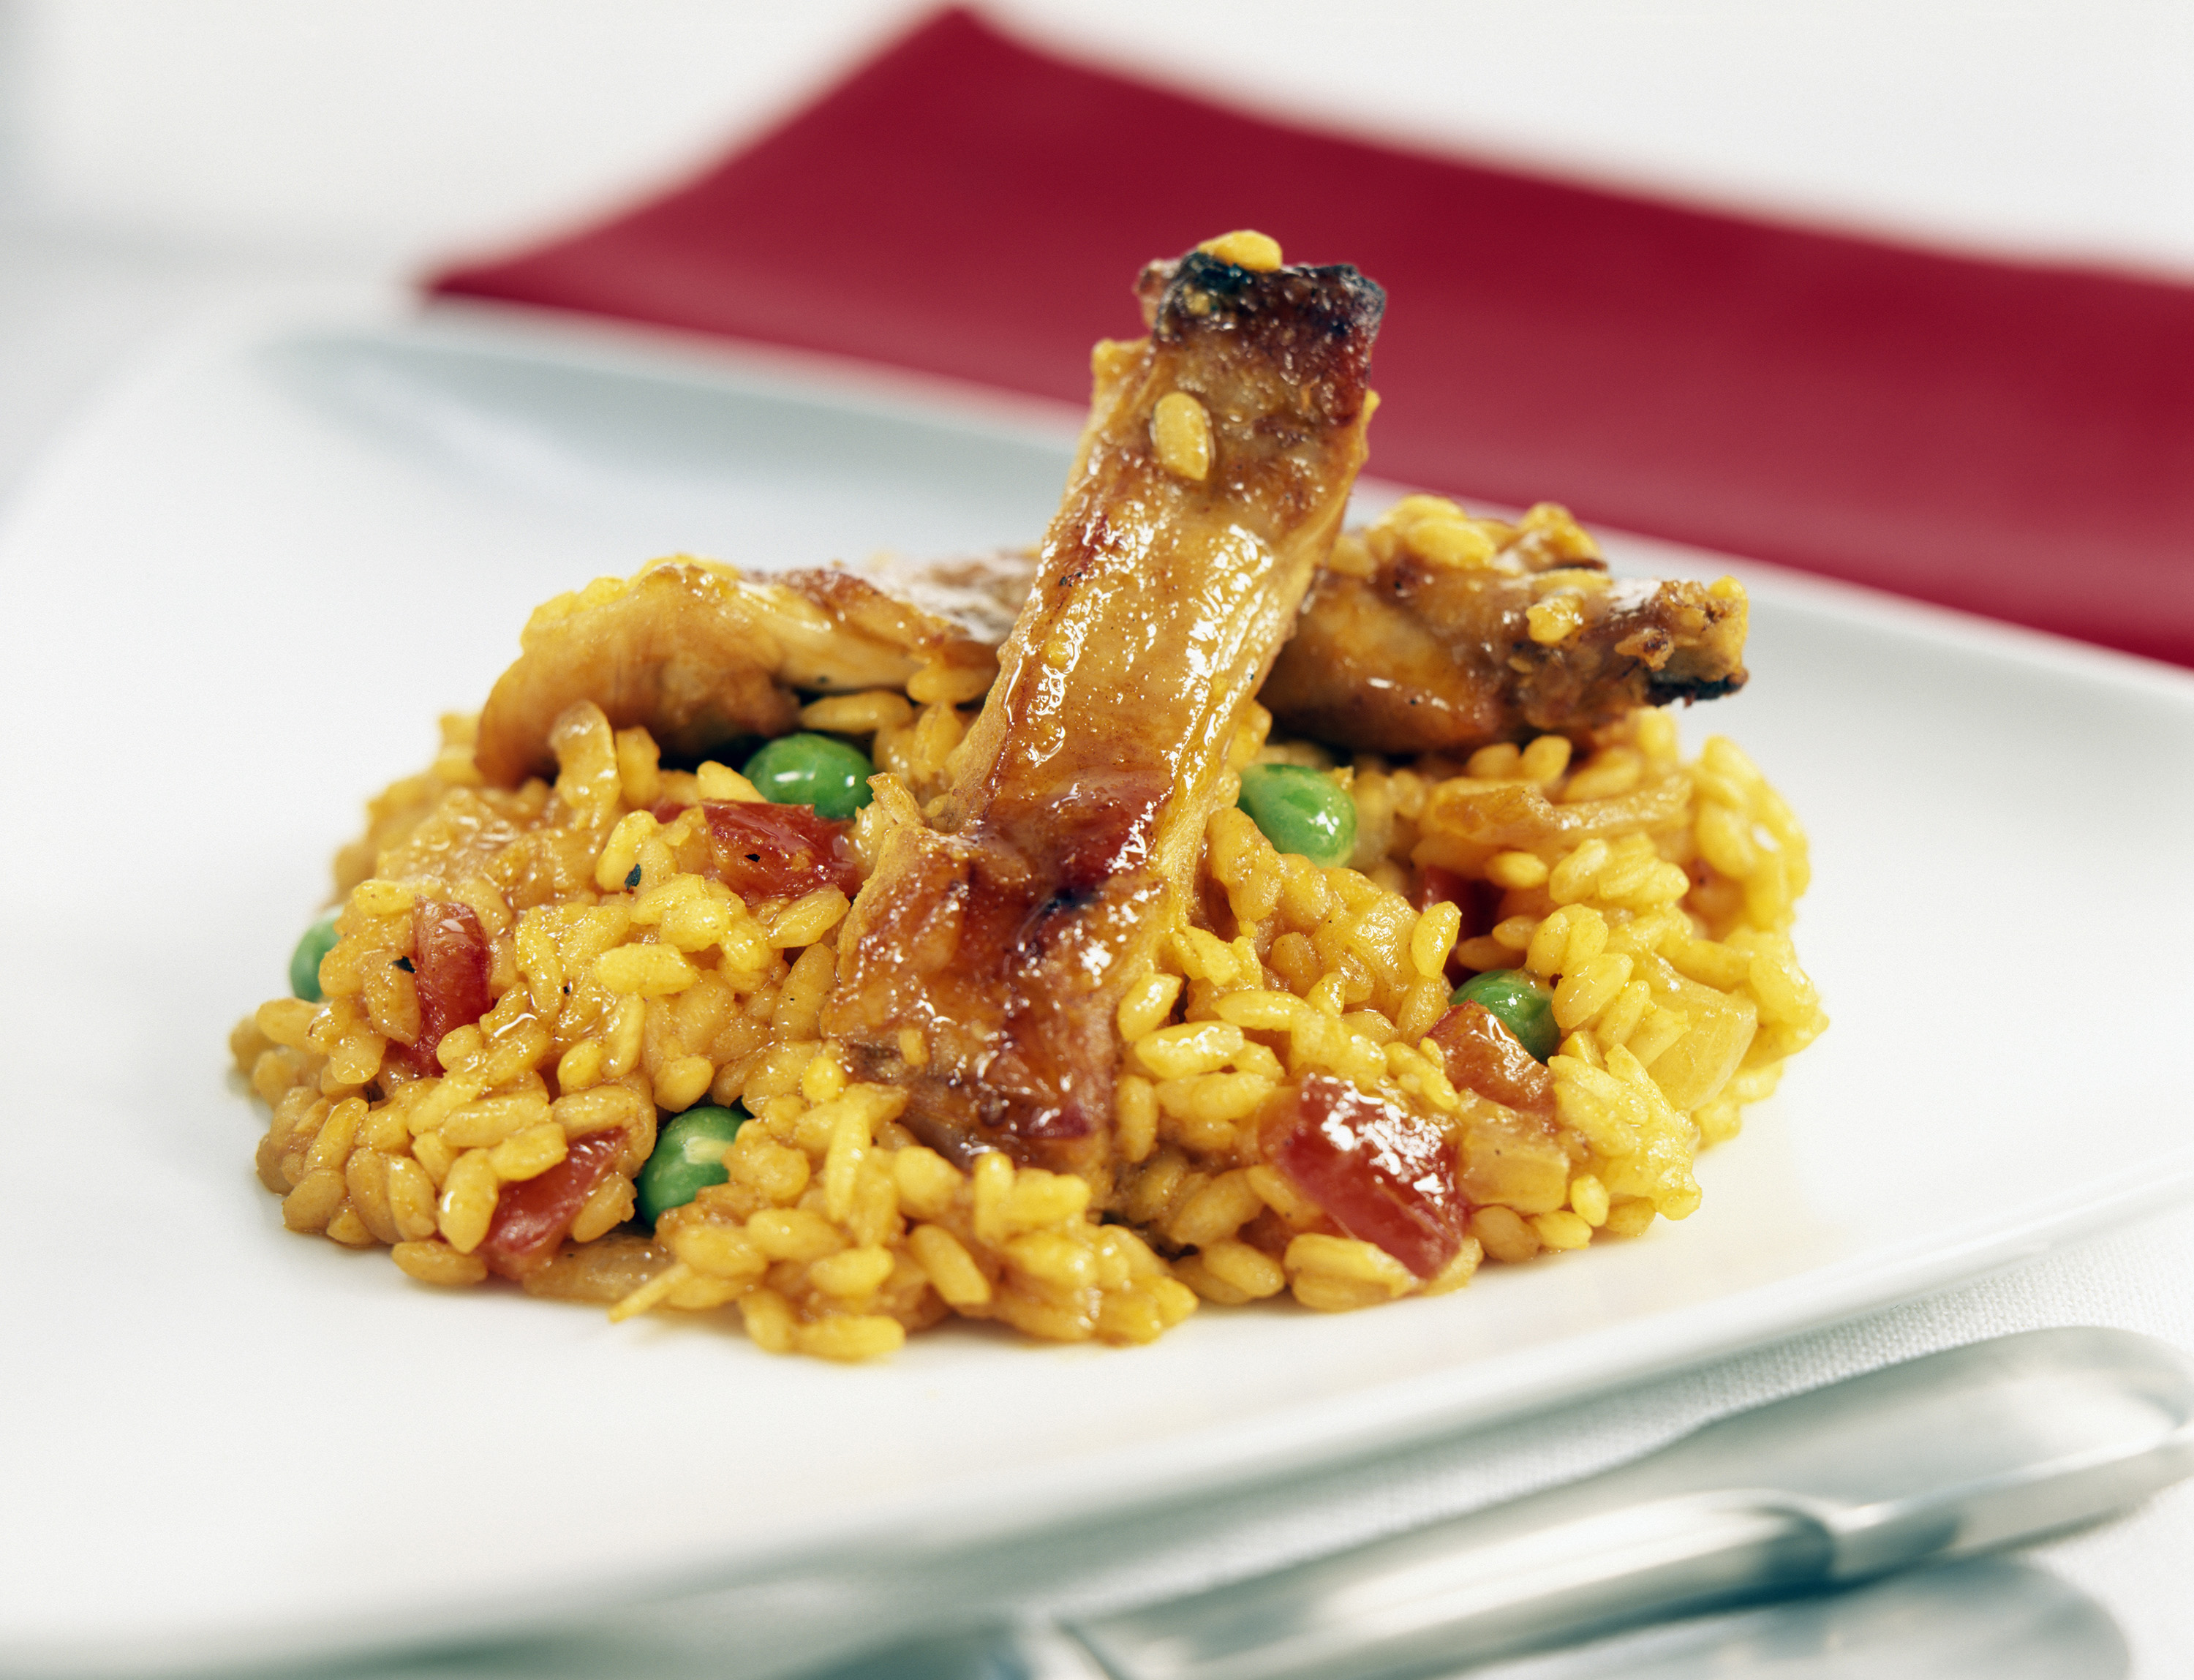 Conejo Con Arroz | Traditional Rice Dish From Calasparra, Spain